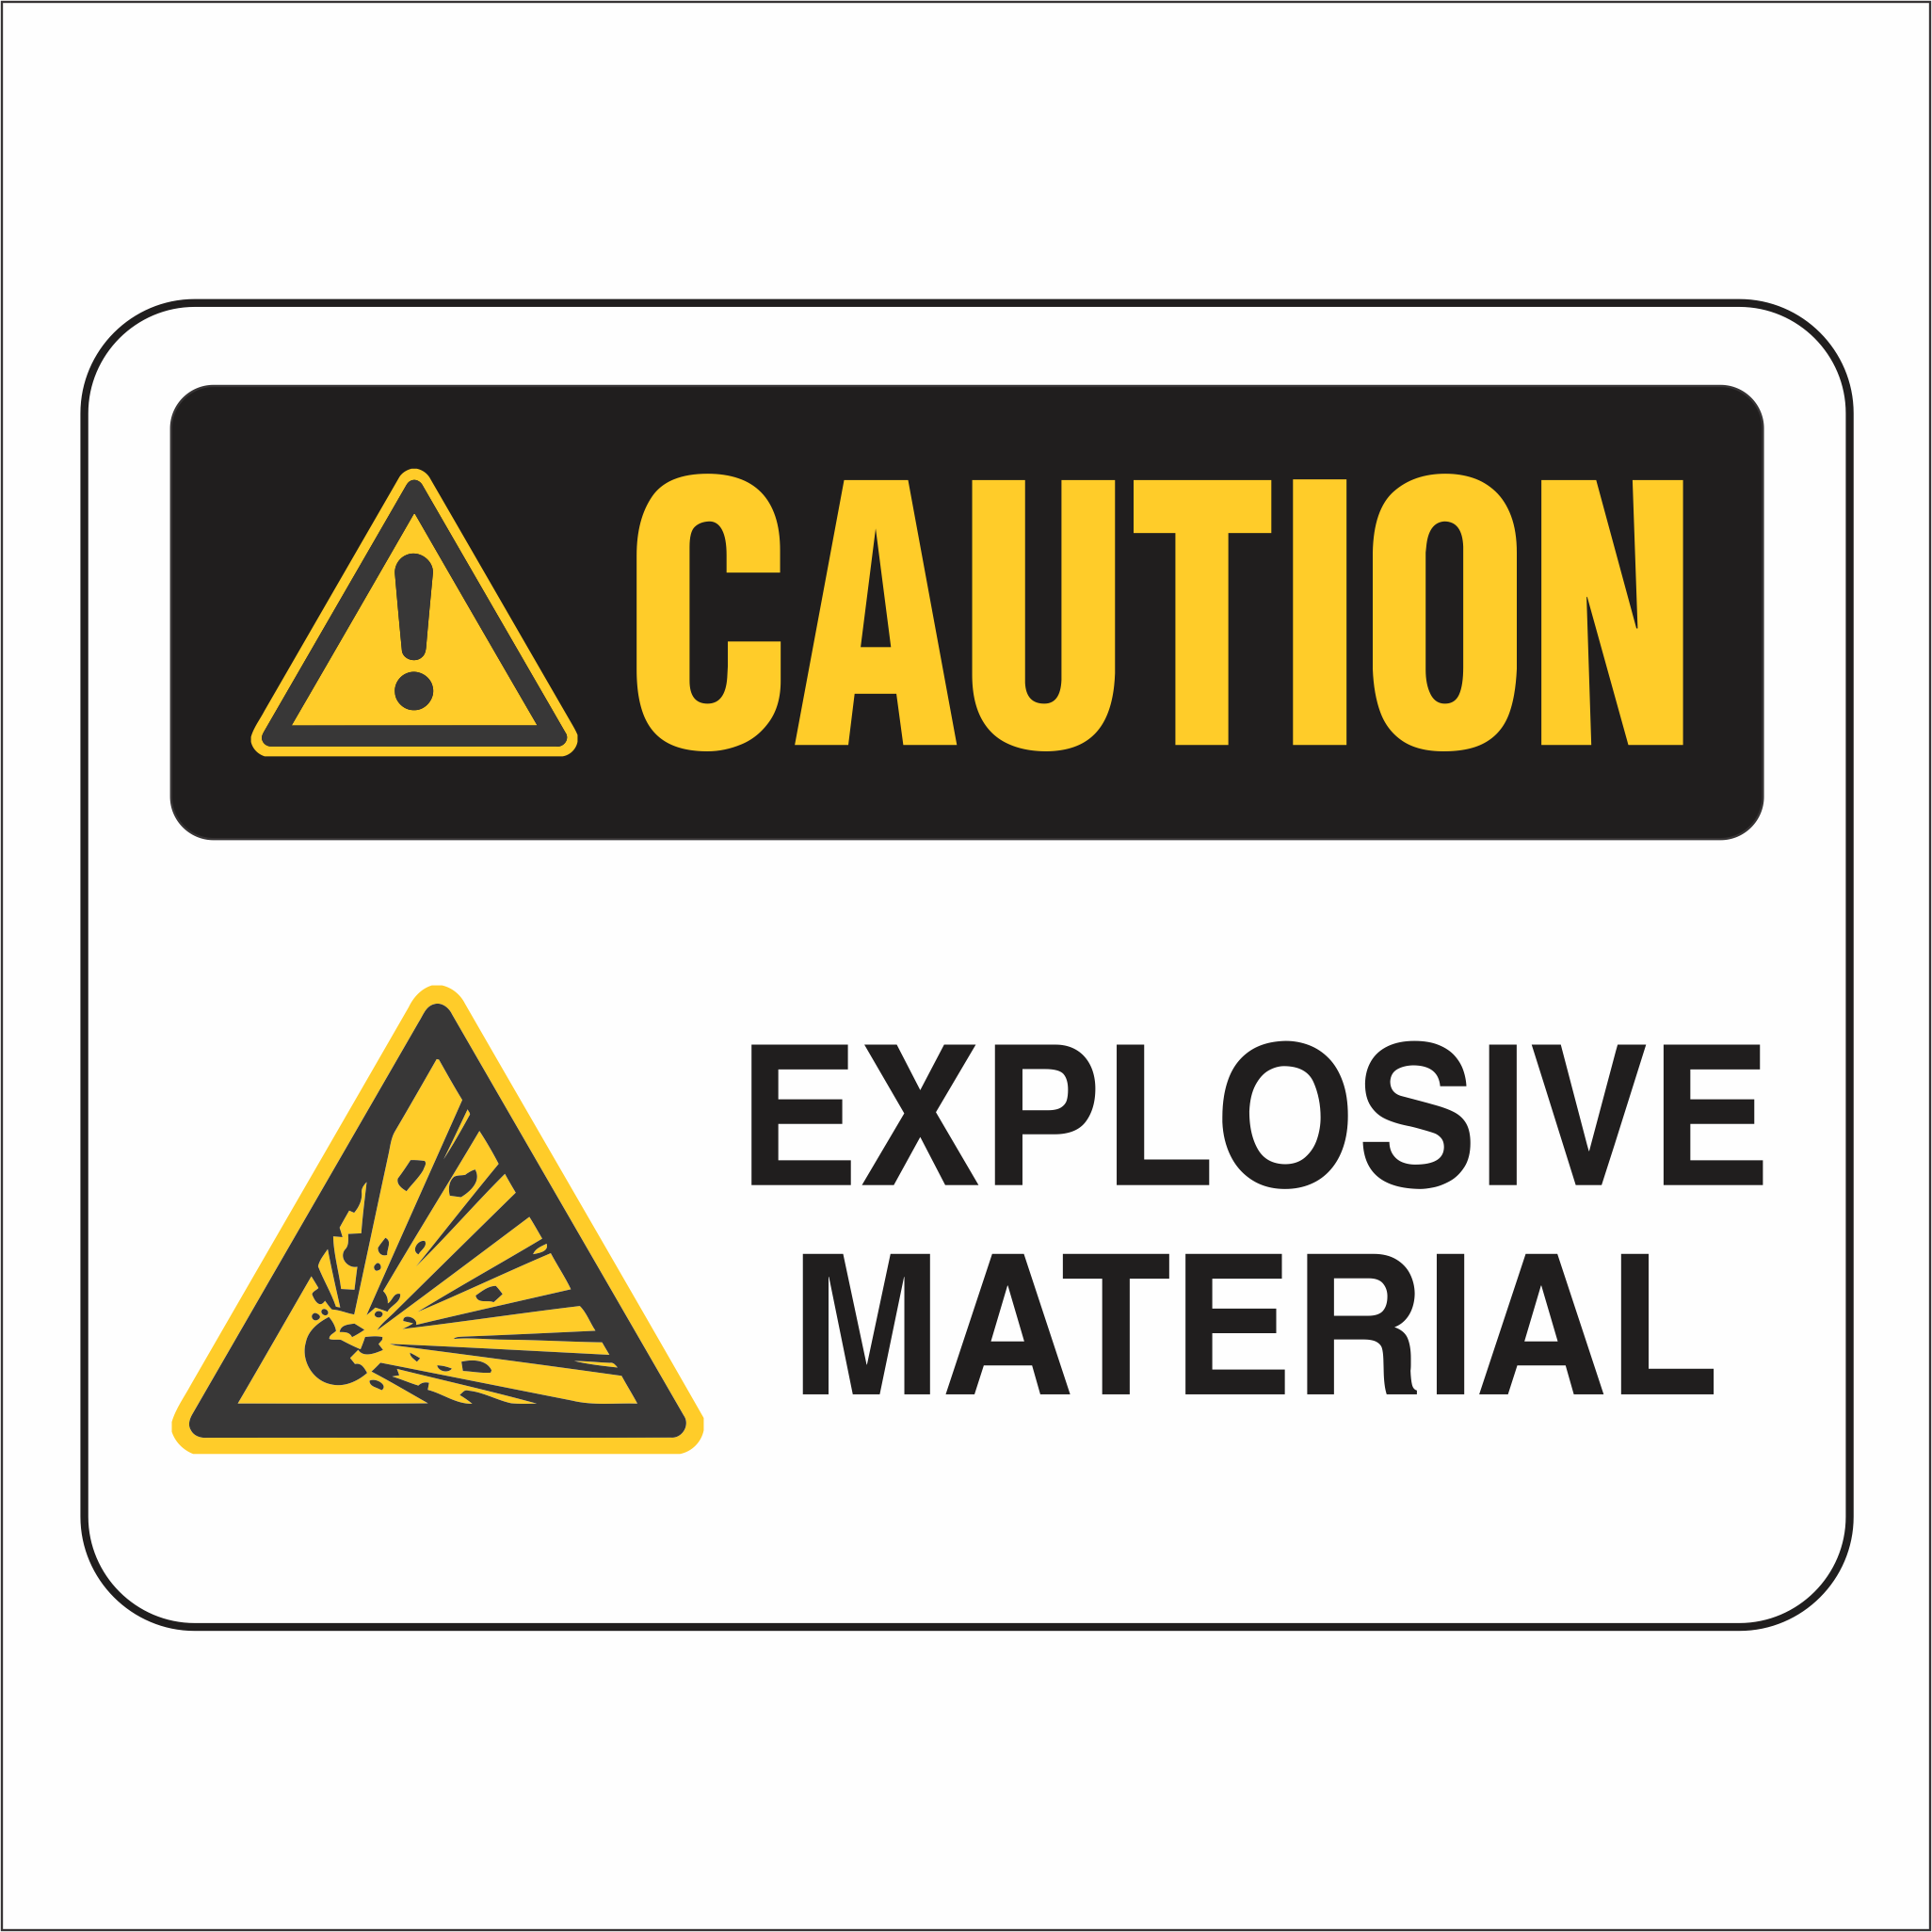 Explosive Material - Caution - Sign